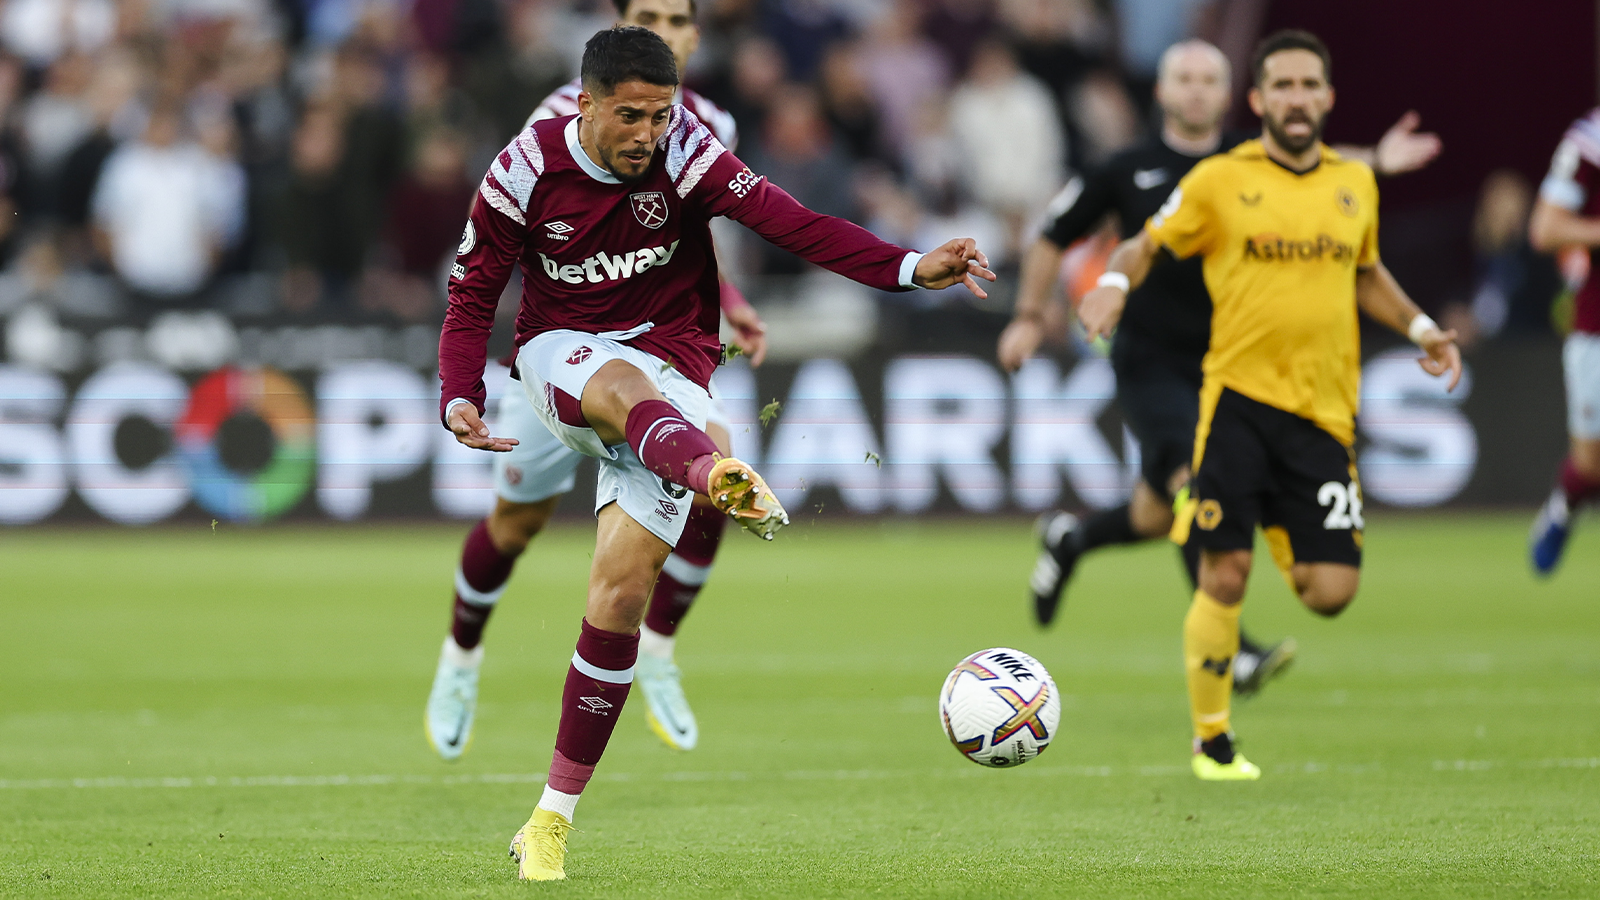 Pablo Fornals almost adds a third Hammers' goal against Wolves